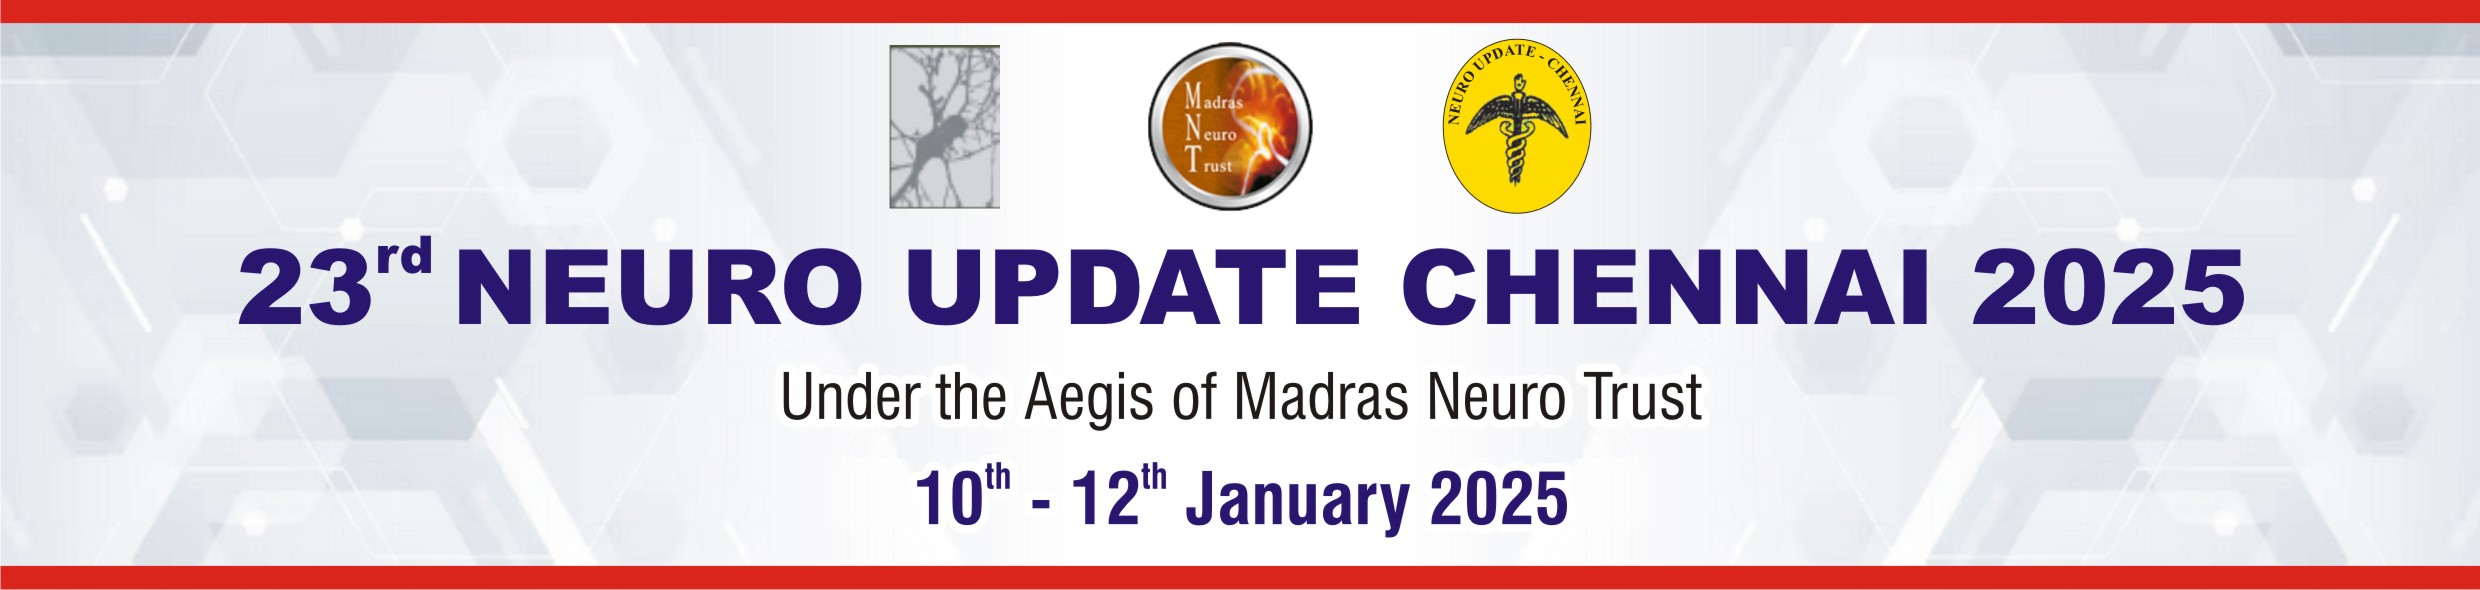 NEURO UPDATE CHENNAI 2025 ABSTRACT SUBMISSSION 